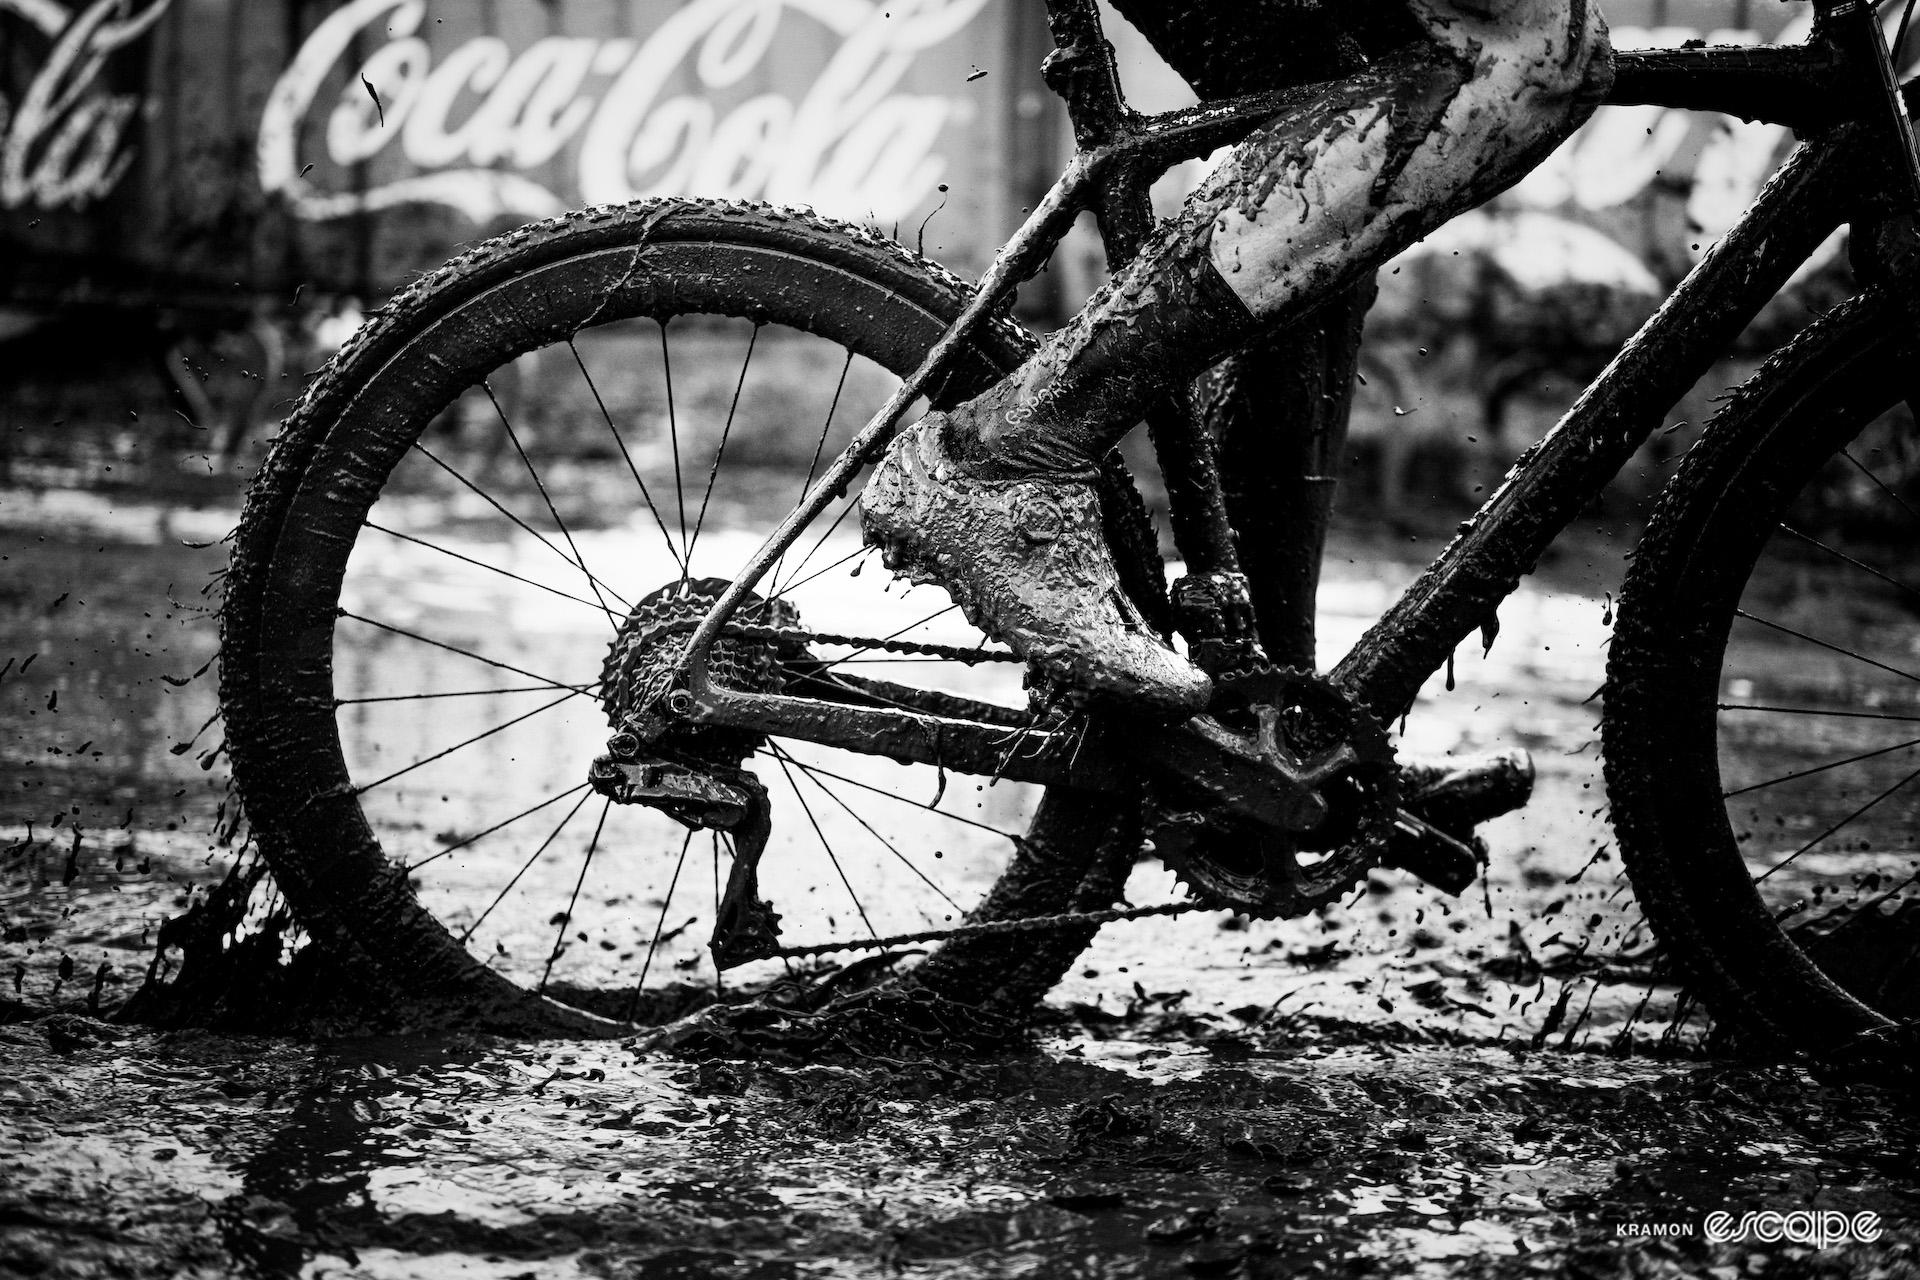 A black and white close-up of Felipe Orts's mud-covered bike and the rider's lower legs during the GP Sven Nys, X2O Trofee Baal.